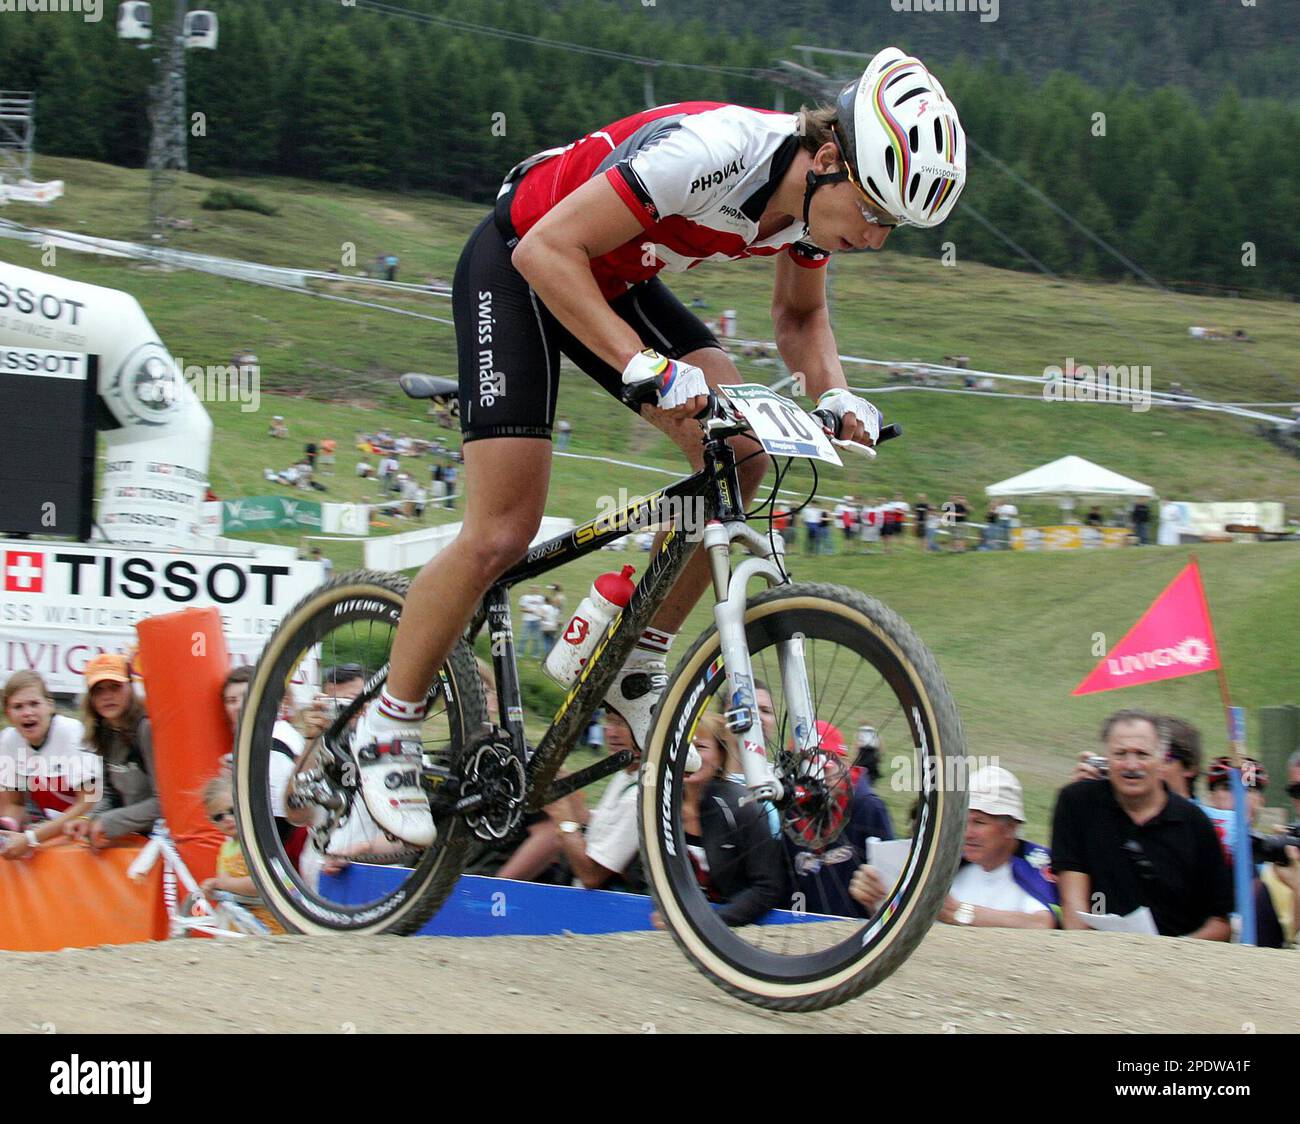 Nino Schurter of Switzerland pedals to the thrid place during the Men's  Under 23 event at the UCI Mountain Bike and Trials World Championships, in  Livigno, Italy, Friday, Sept. 2, 2005. (AP